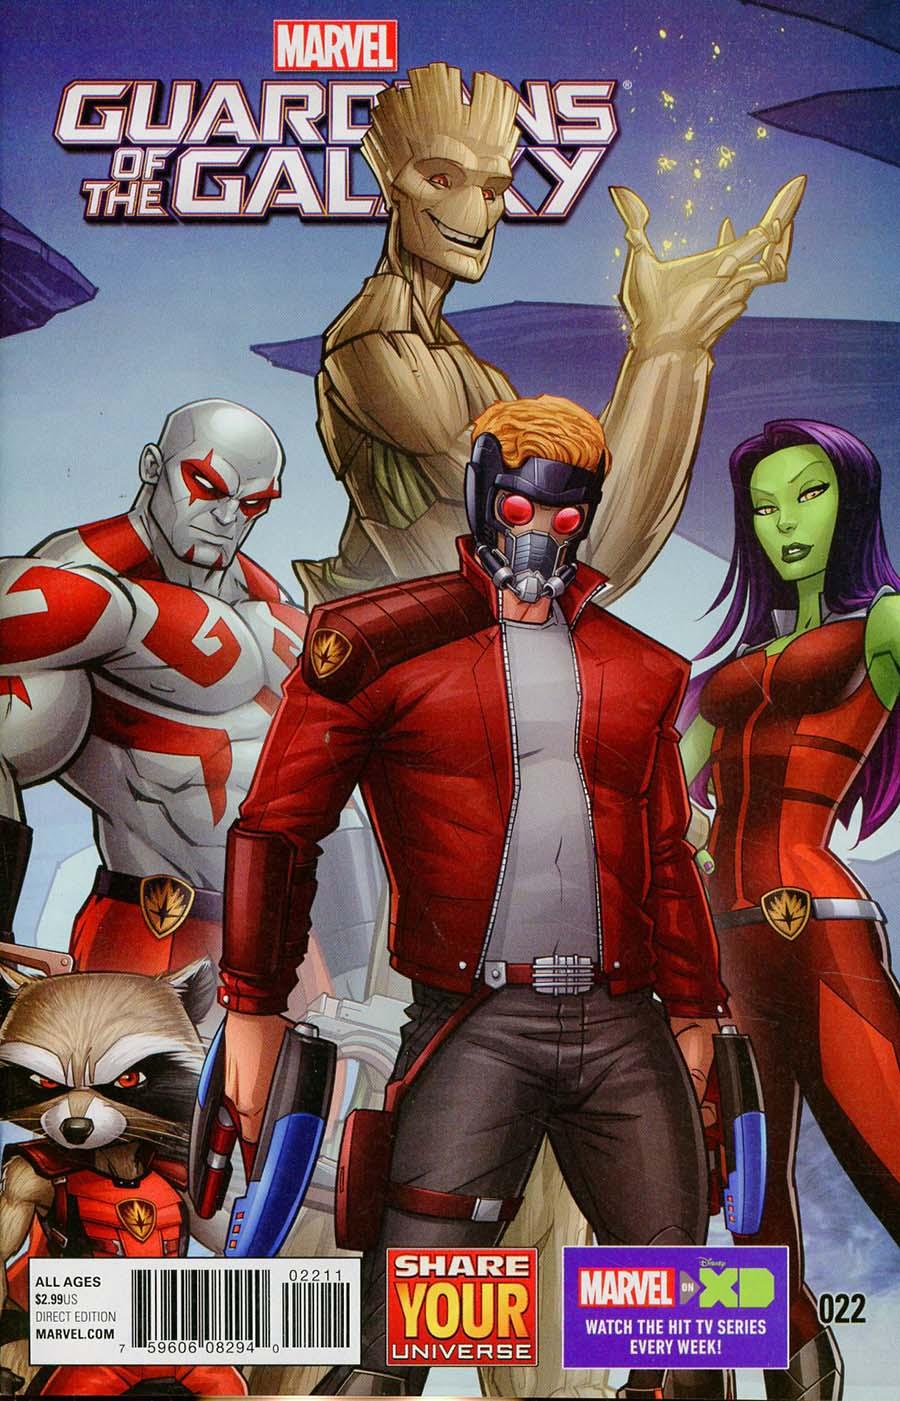 Marvel Universe Guardians of the Galaxy Vol. 2 #22